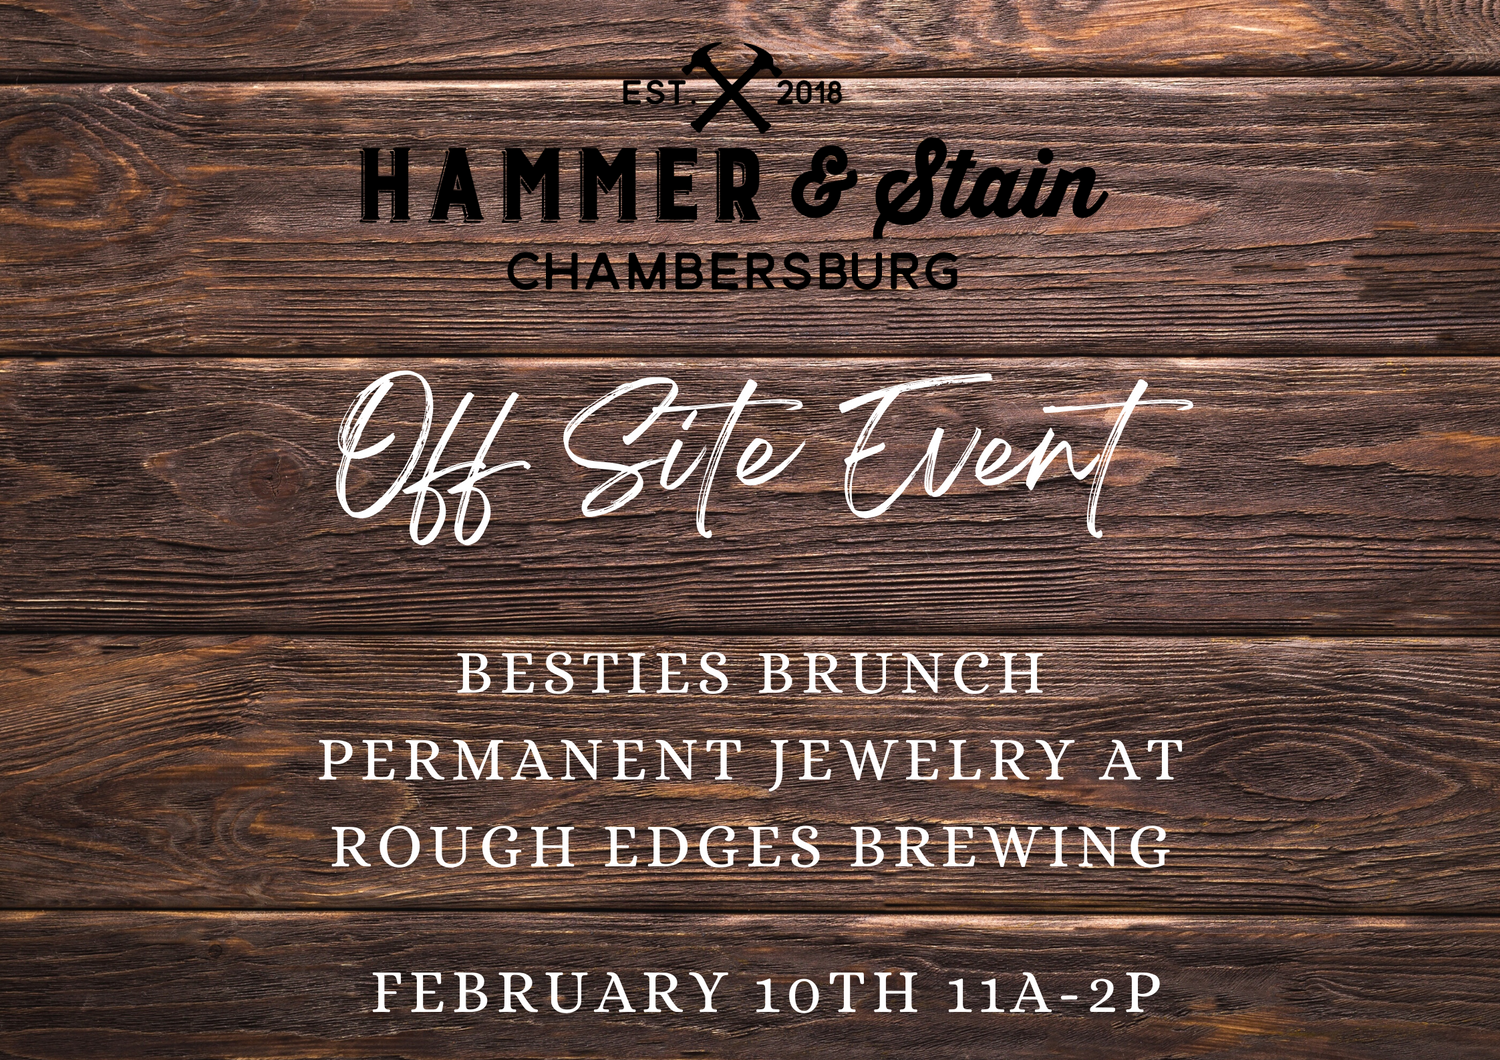 02/10/24 Besties Brunch Permanent Jewely at Rough Edges Brewing 11a-2p